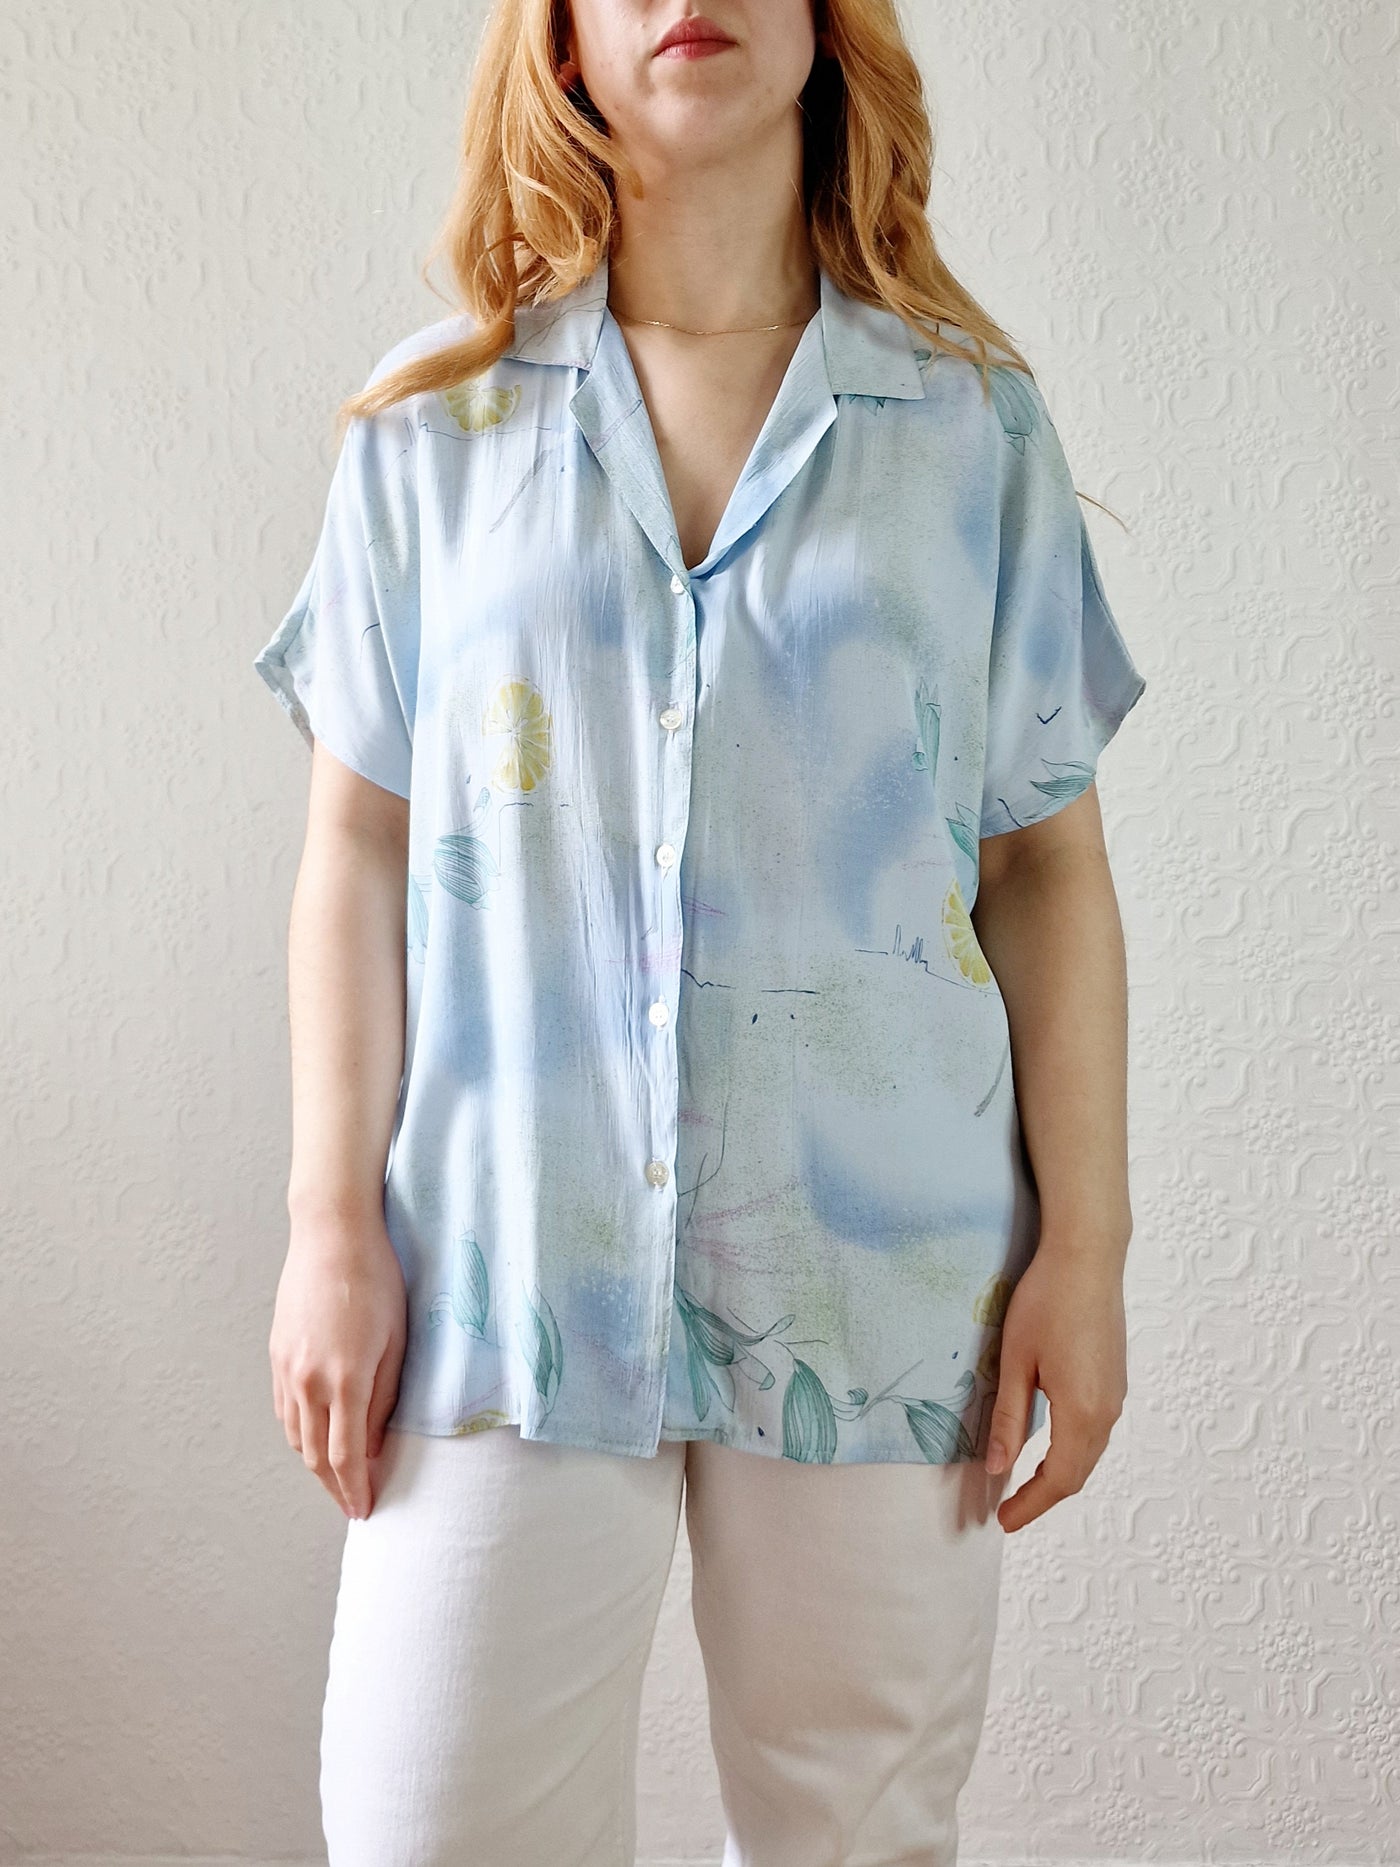 Vintage 80s Light Blue Blouse with Cap Sleeves - M